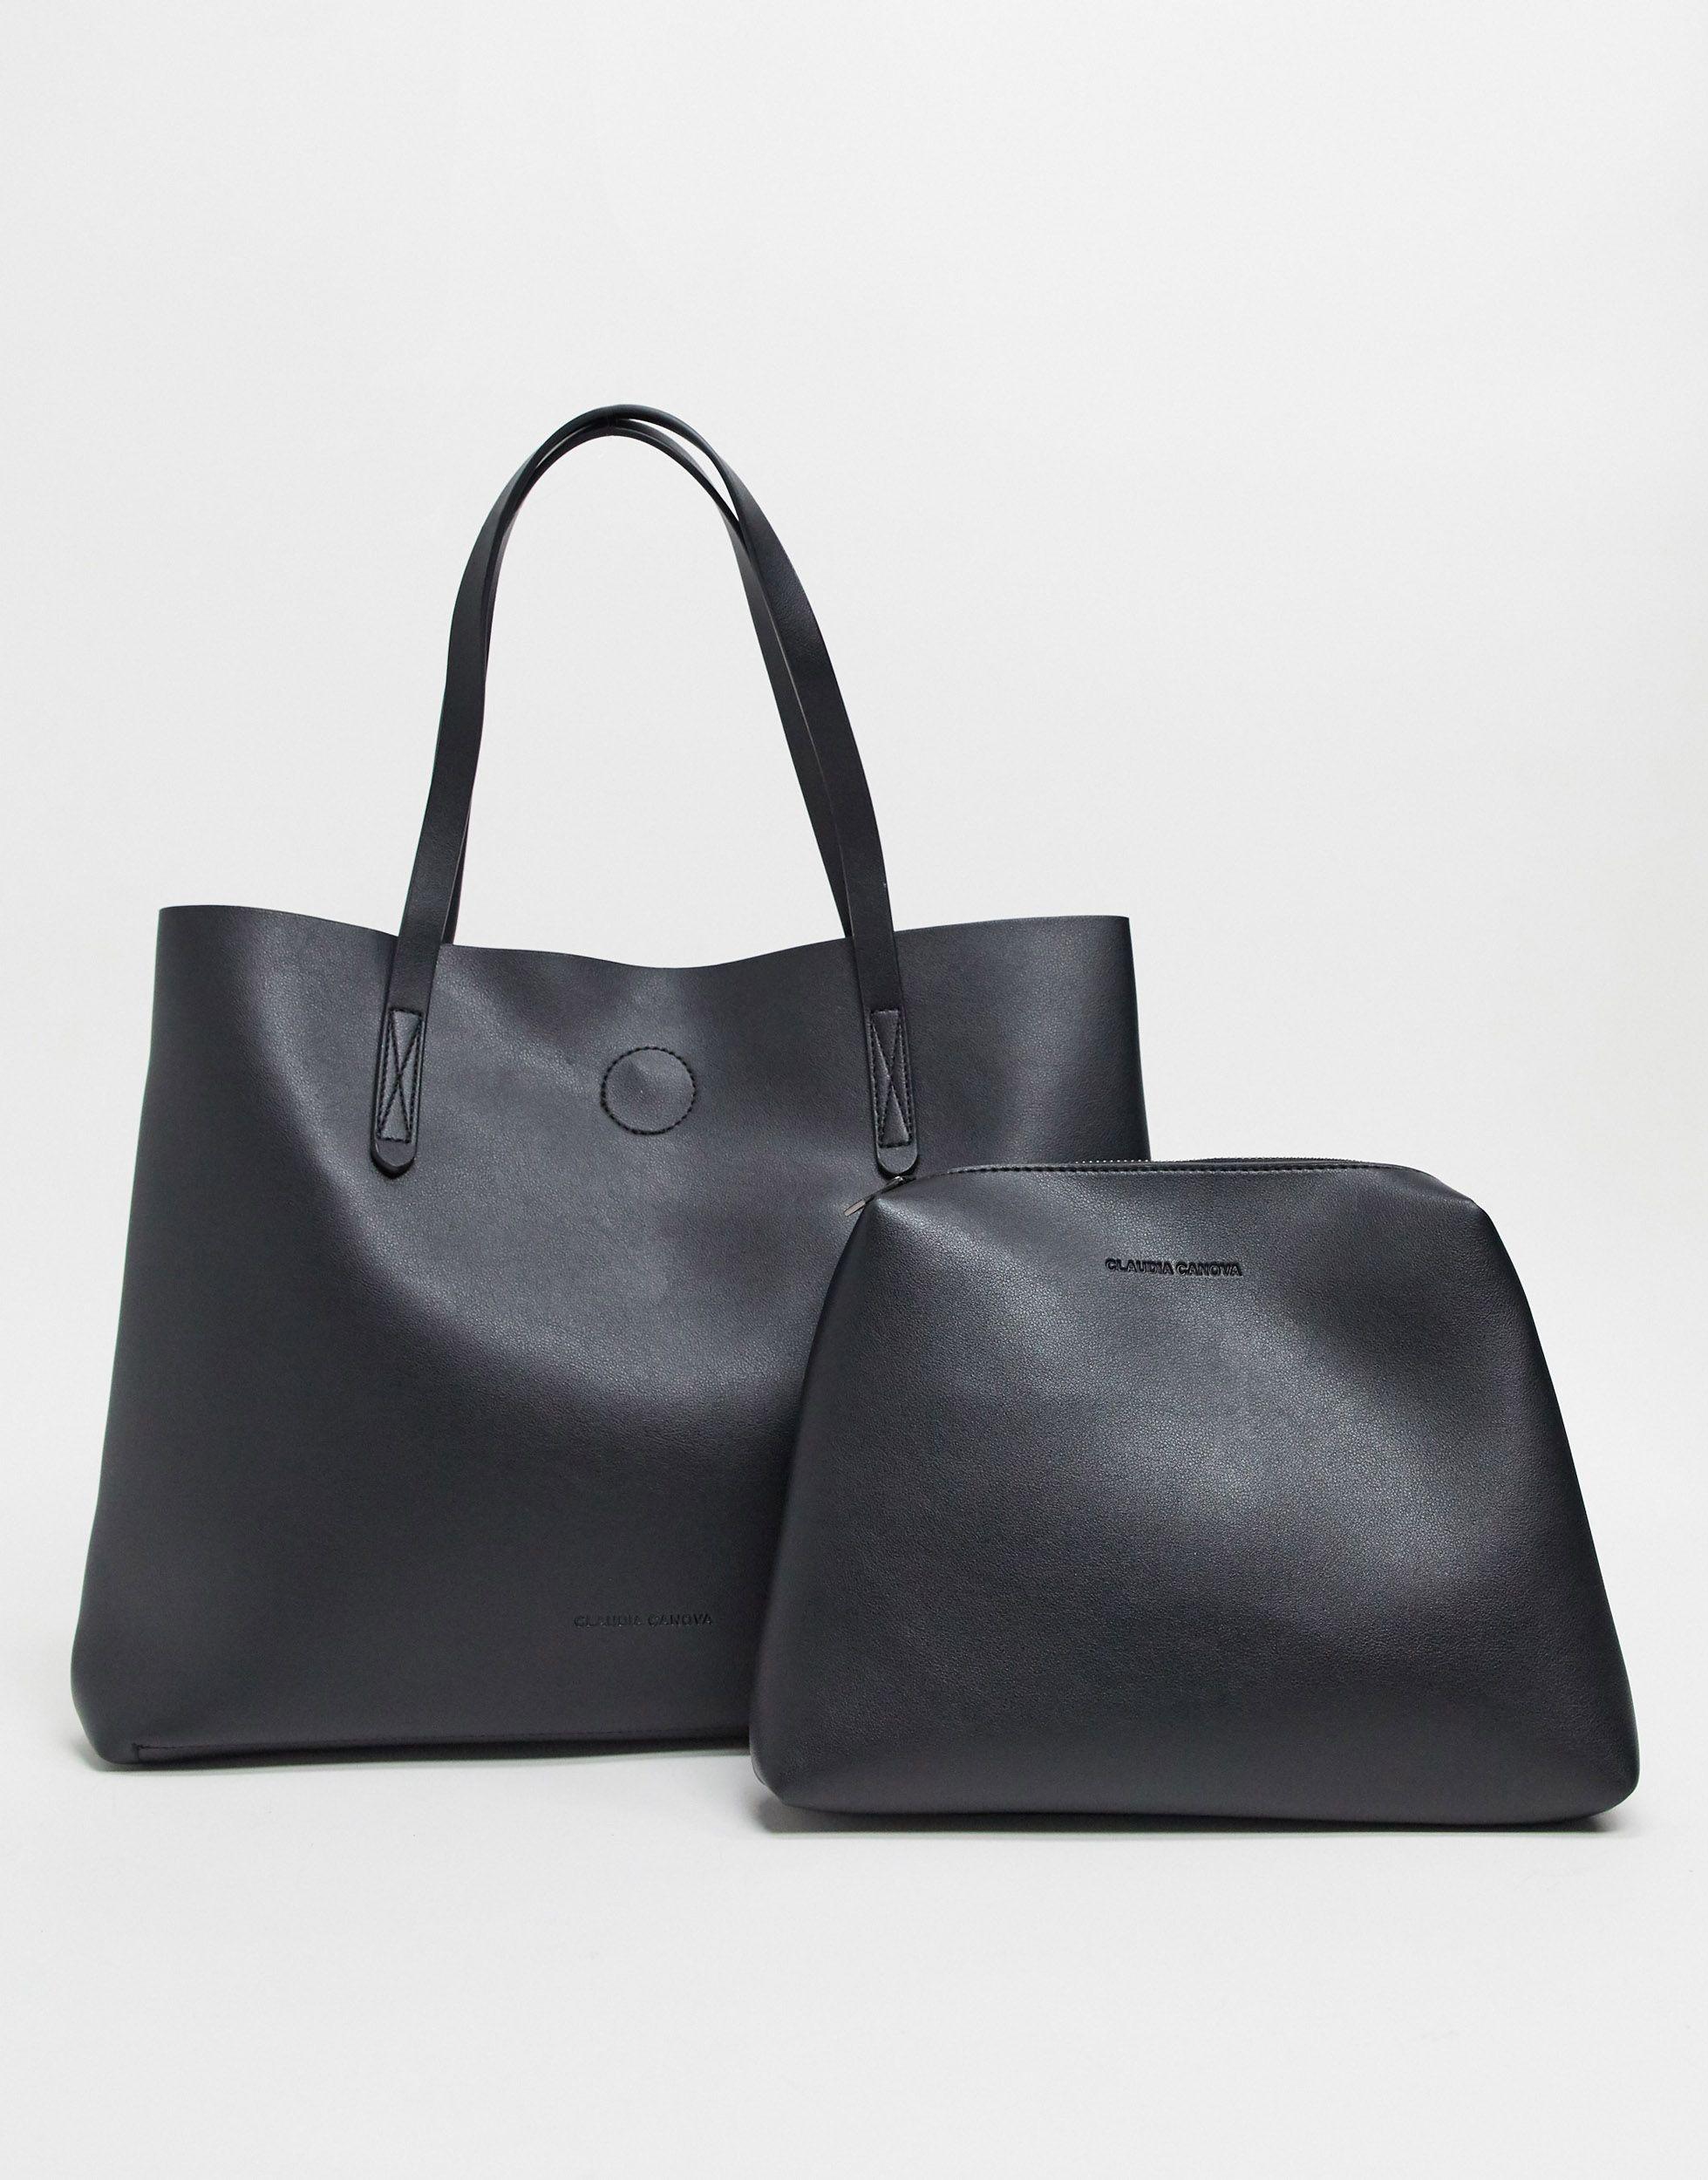 Claudia Canova Unlined A-line Tote Bag in Black | Lyst